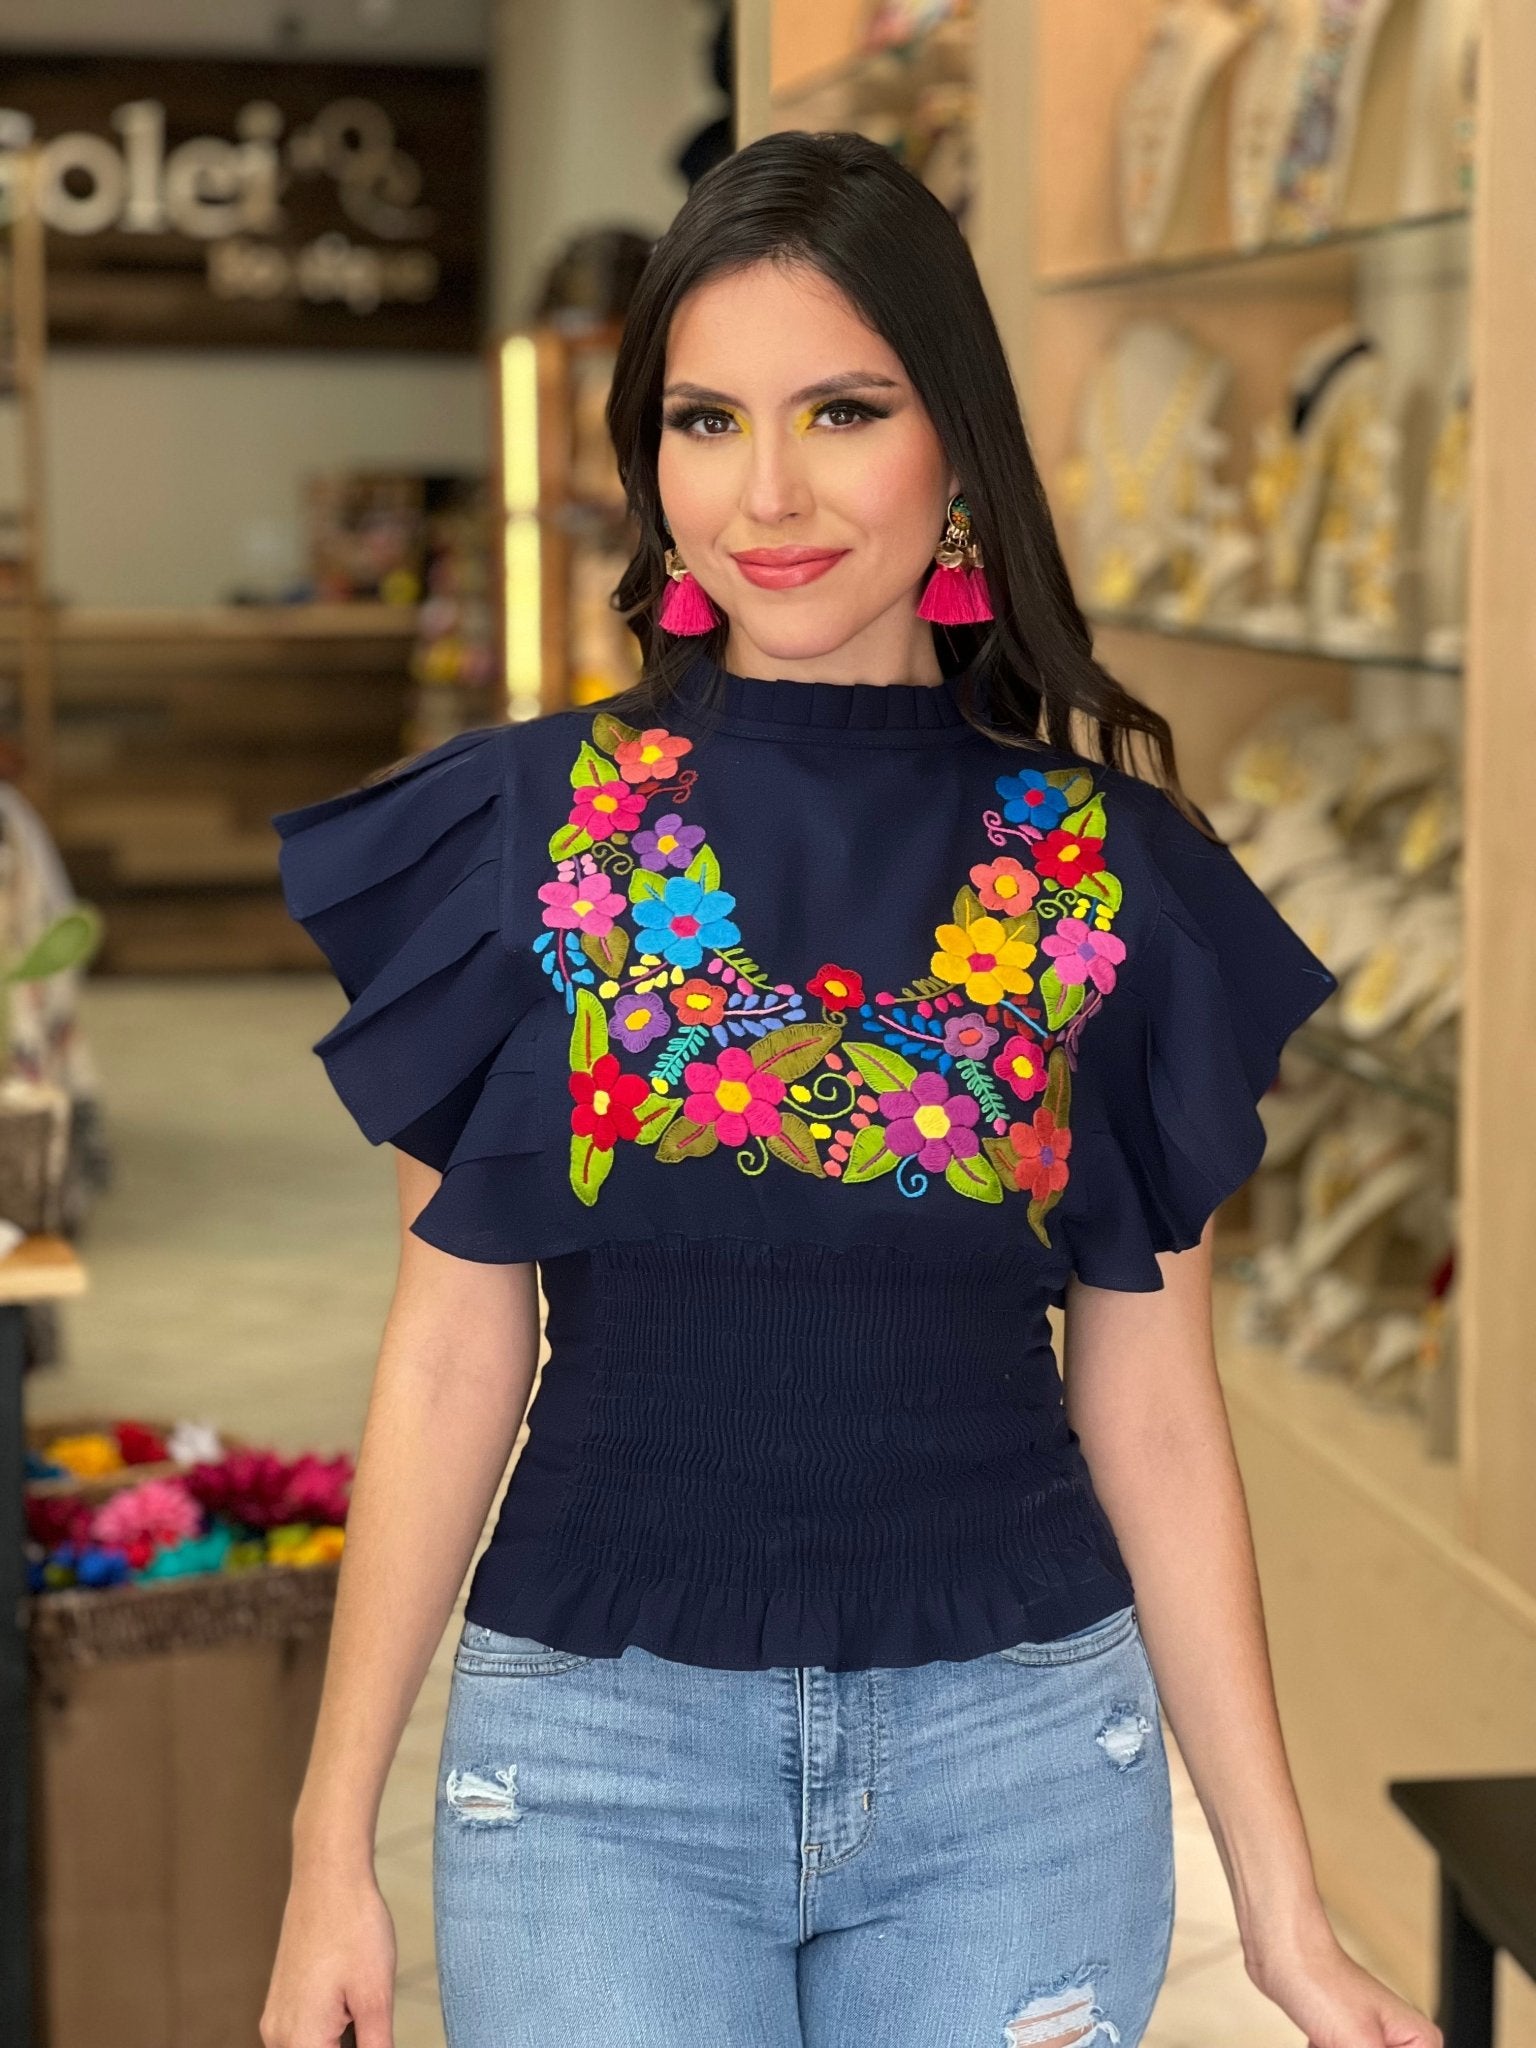 Floral Embroidered Butterfly Sleeve Top. Ursula Blouse. - Solei Store